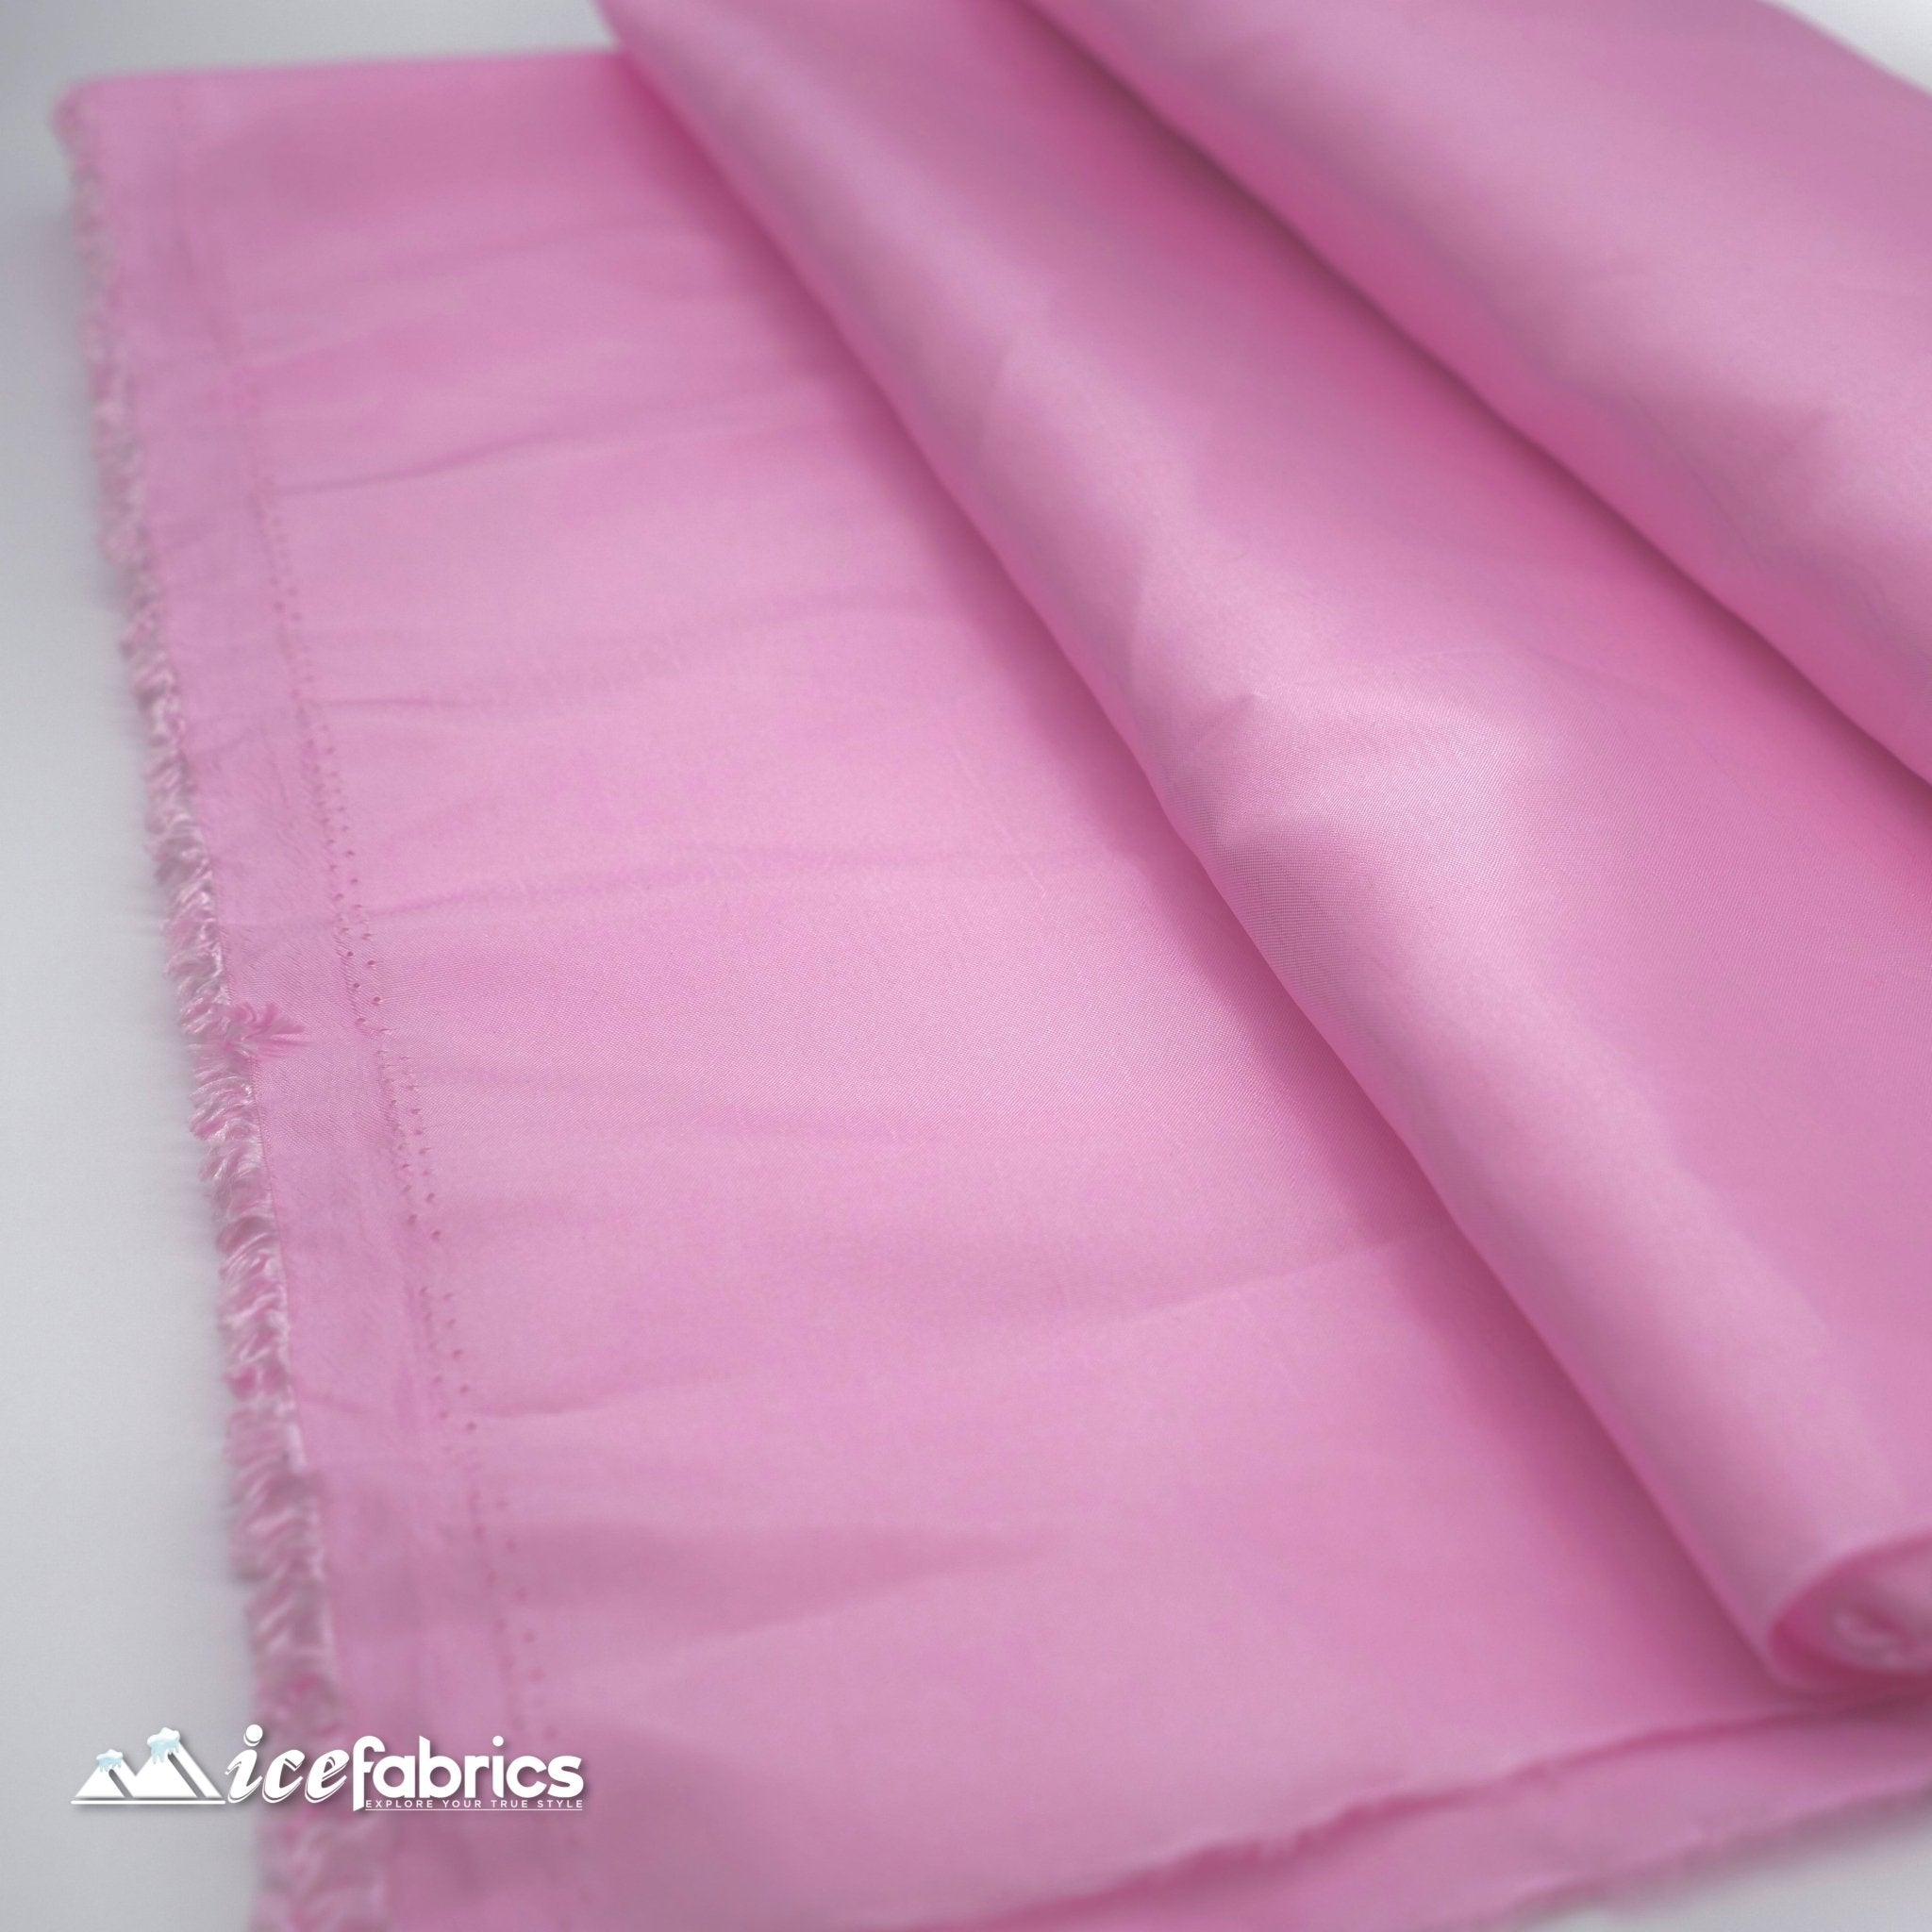 High Quality Solid Taffeta Fabric_ 60" Width_ By The YardTaffeta FabricICEFABRICICE FABRICSPinkHigh Quality Solid Taffeta Fabric_ 60" Width_ By The YardTaffeta FabricICEFABRICICE FABRICSPinkHigh Quality Solid Taffeta Fabric_ 60" Width_ By The Yard ICEFABRIC Pink